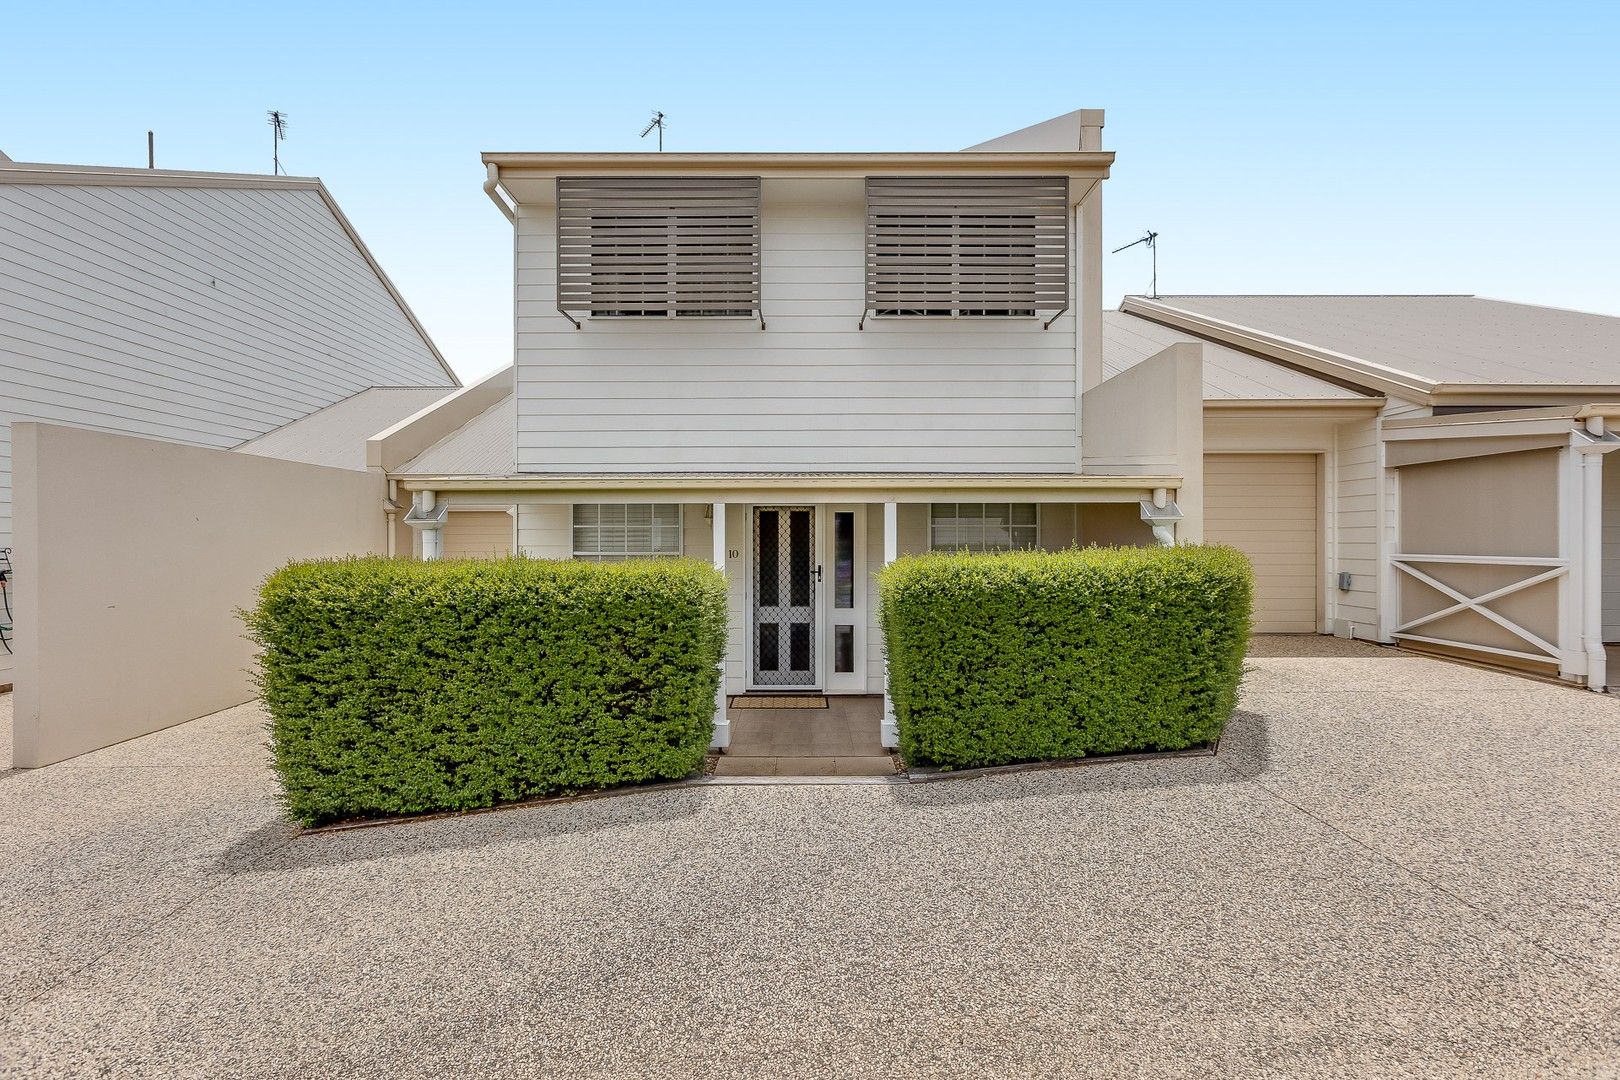 10/90 Glenvale Road, Harristown QLD 4350, Image 0